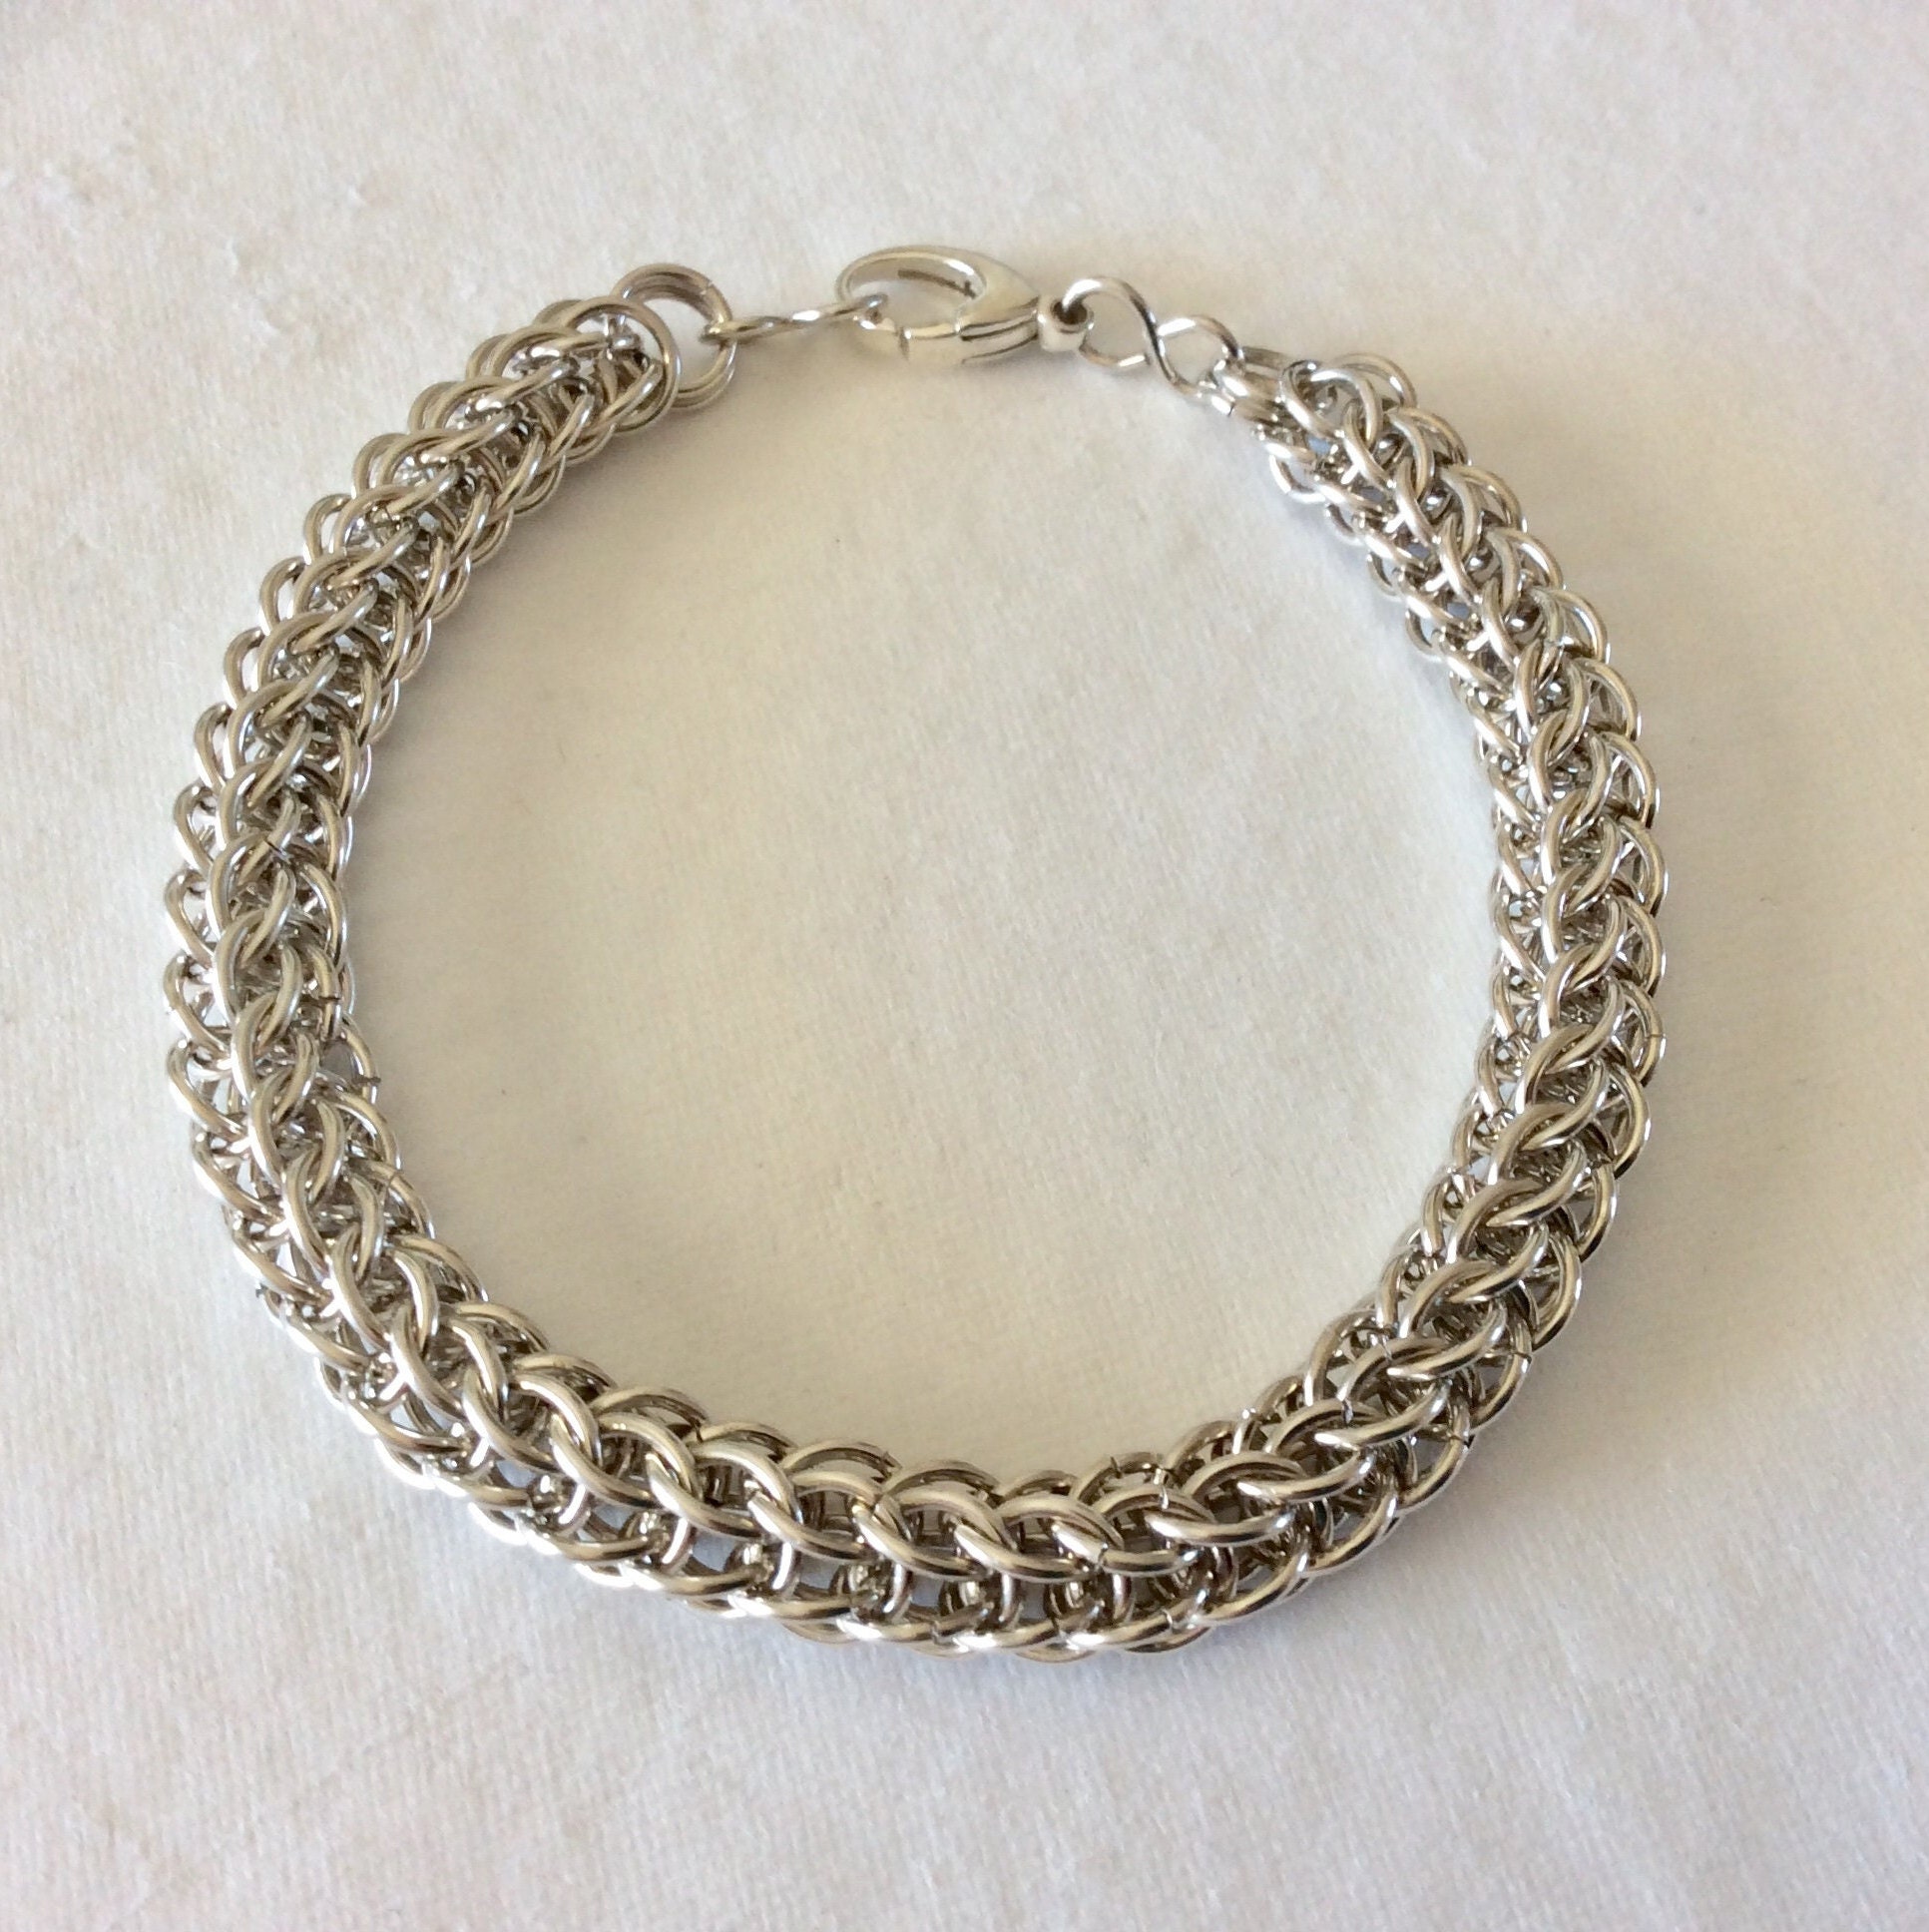 Flat Full Persian 6 in 1 Bracelet Kit, Chainmaille Kit, Stainless Steel, Chainmail  Kit, Jump Rings, Lobster Clasp, Chainmail Tutorial 